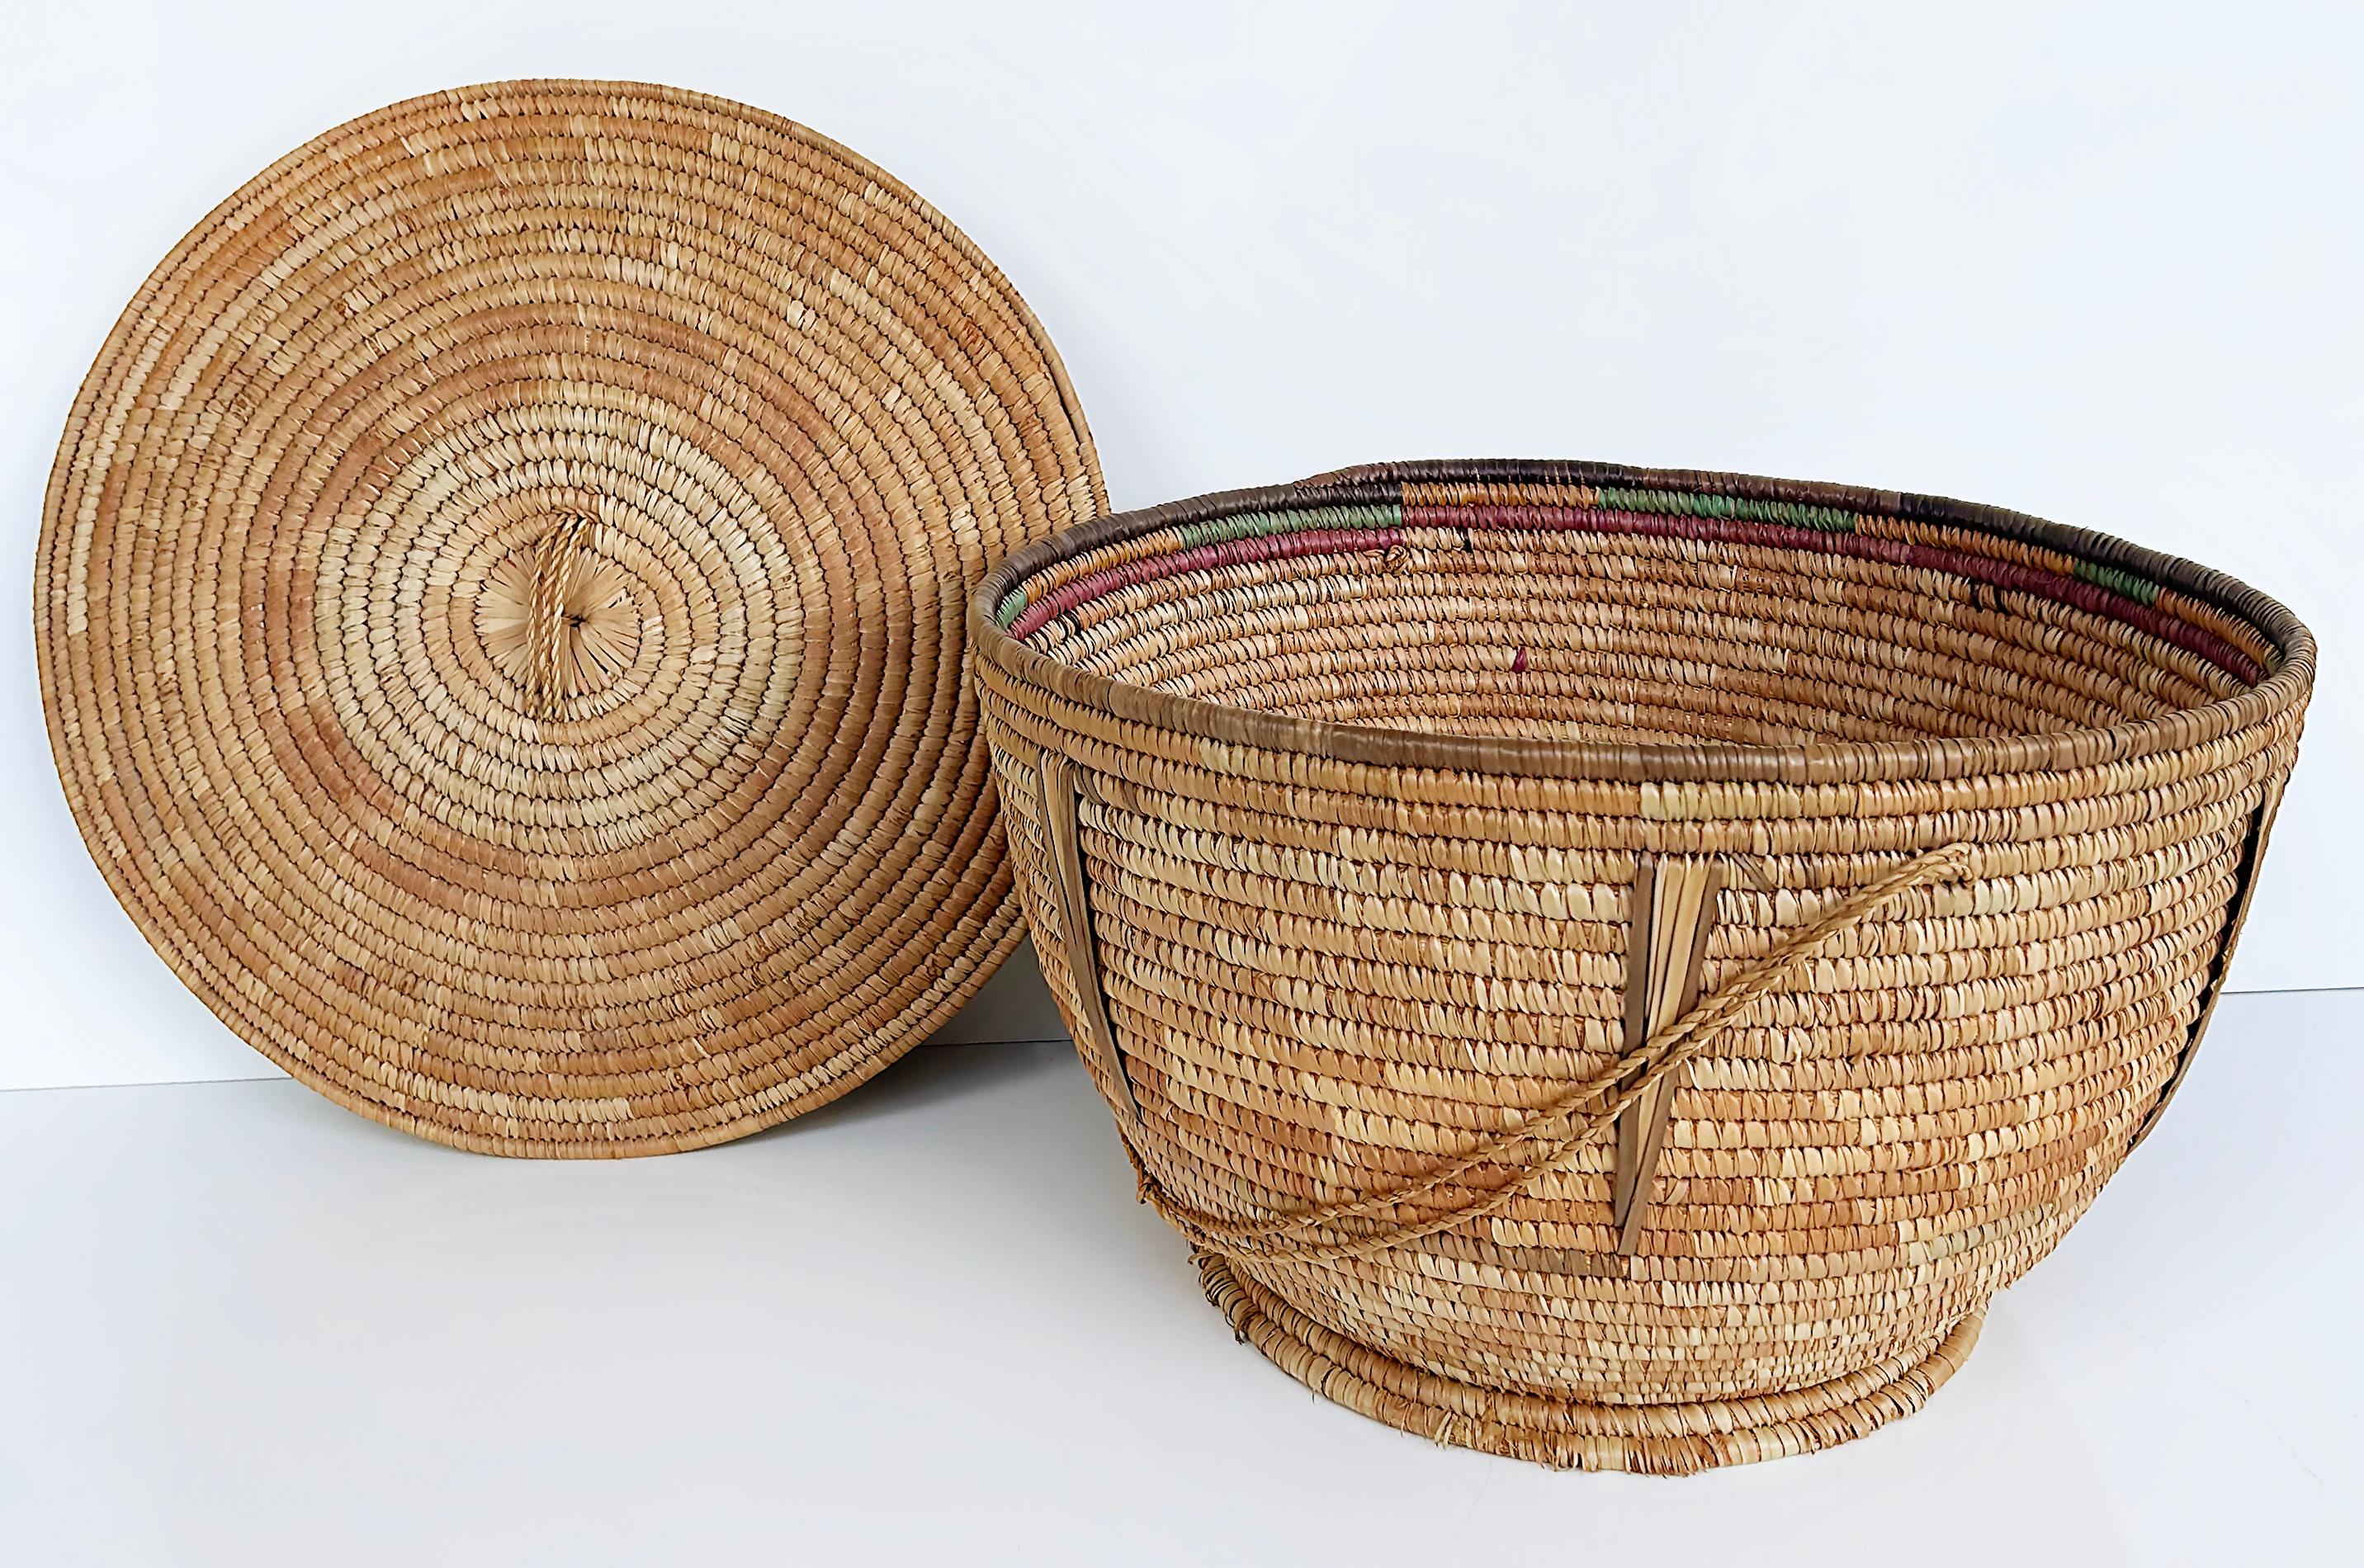 Large Hand-Woven Jute Organic Modern Covered Basket with Rope Handles 

Offered for sale is a large hand-woven jute basket with a rope handle and a woven lid. The base is footed for stability. This attractive basket is very useful for storage yet